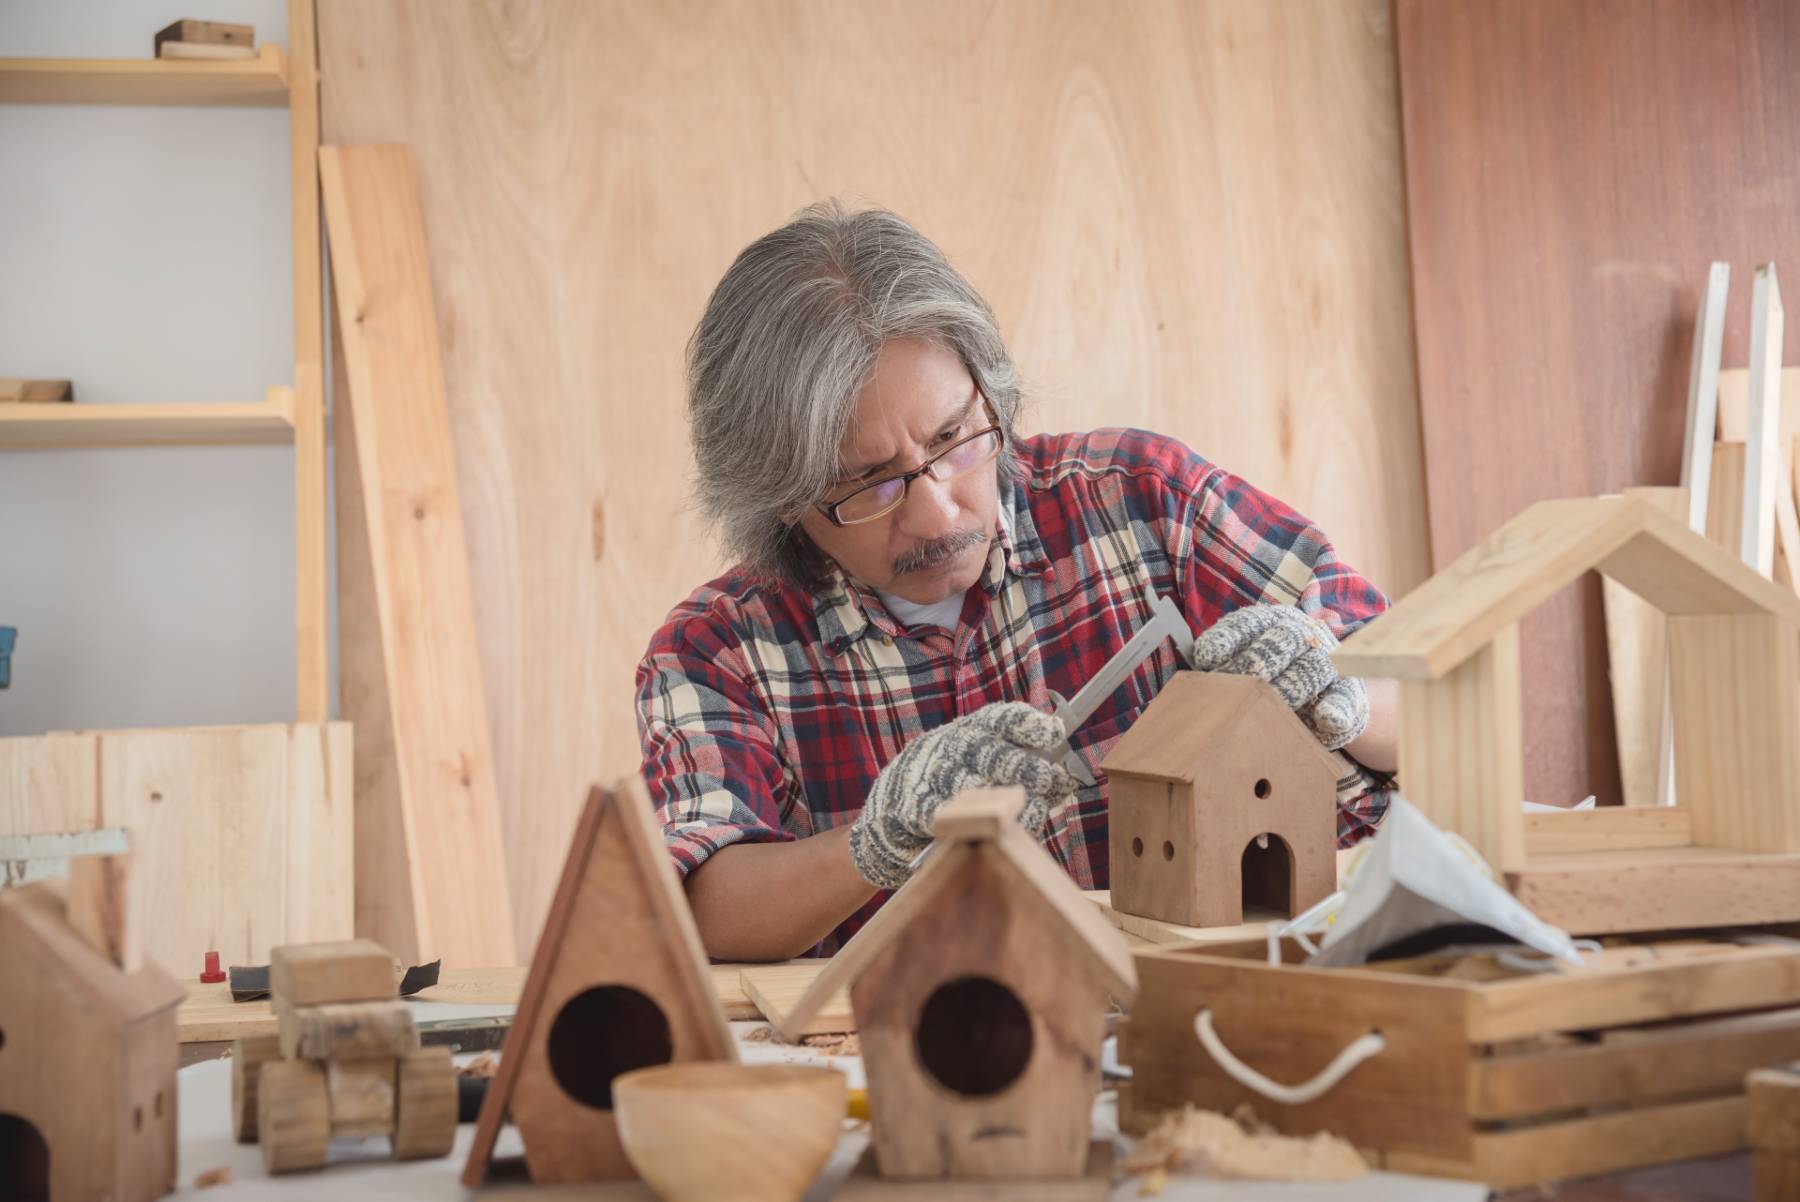 A senior man works on Christmas woodworking projects